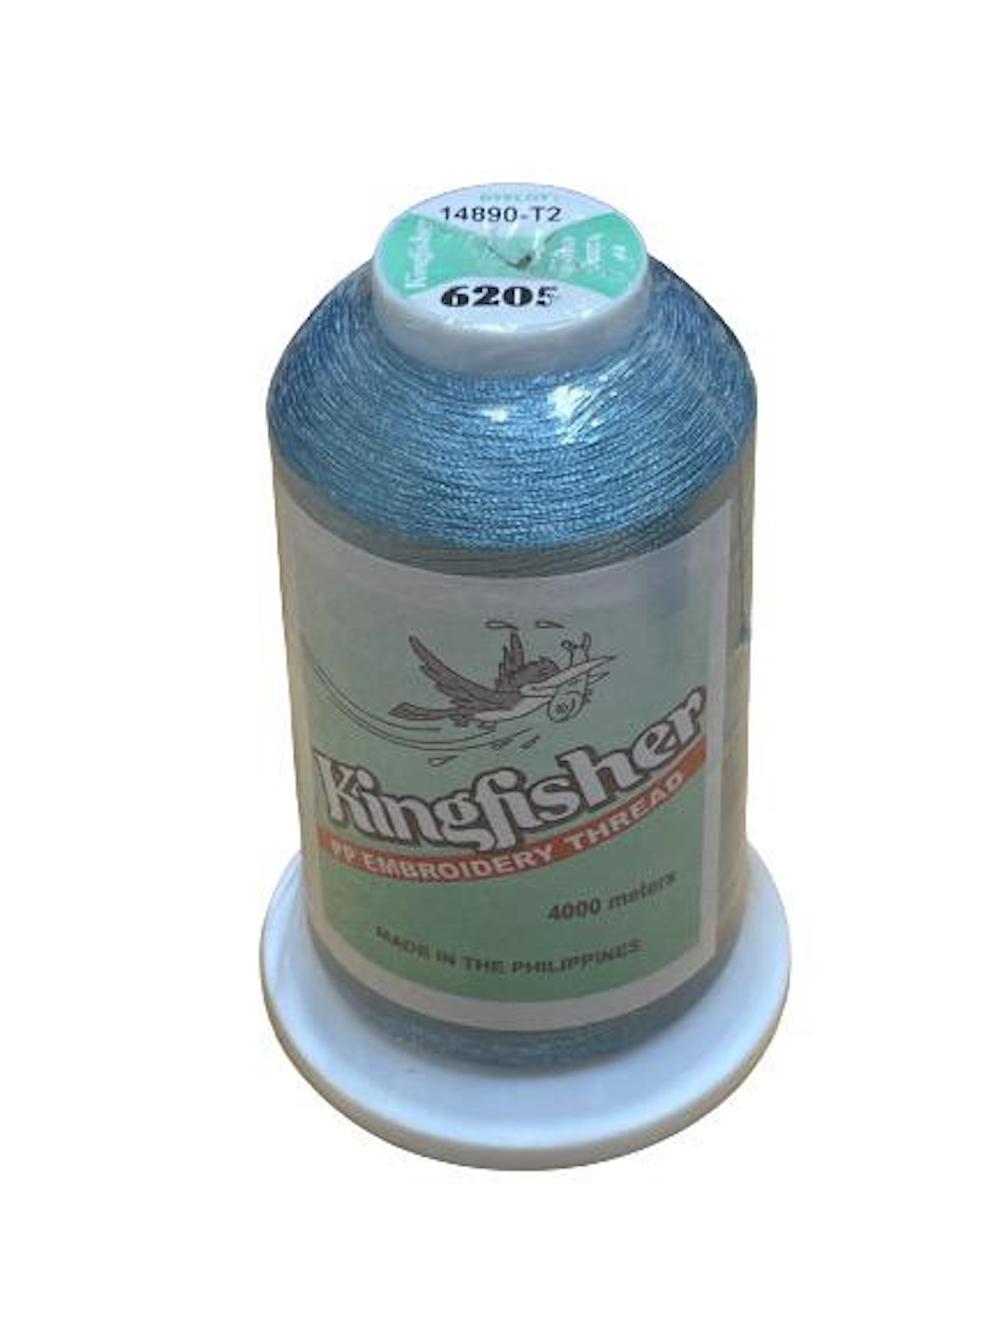 King Fisher Embroidery Thread 4000m 6205 - MY SEWING MALL